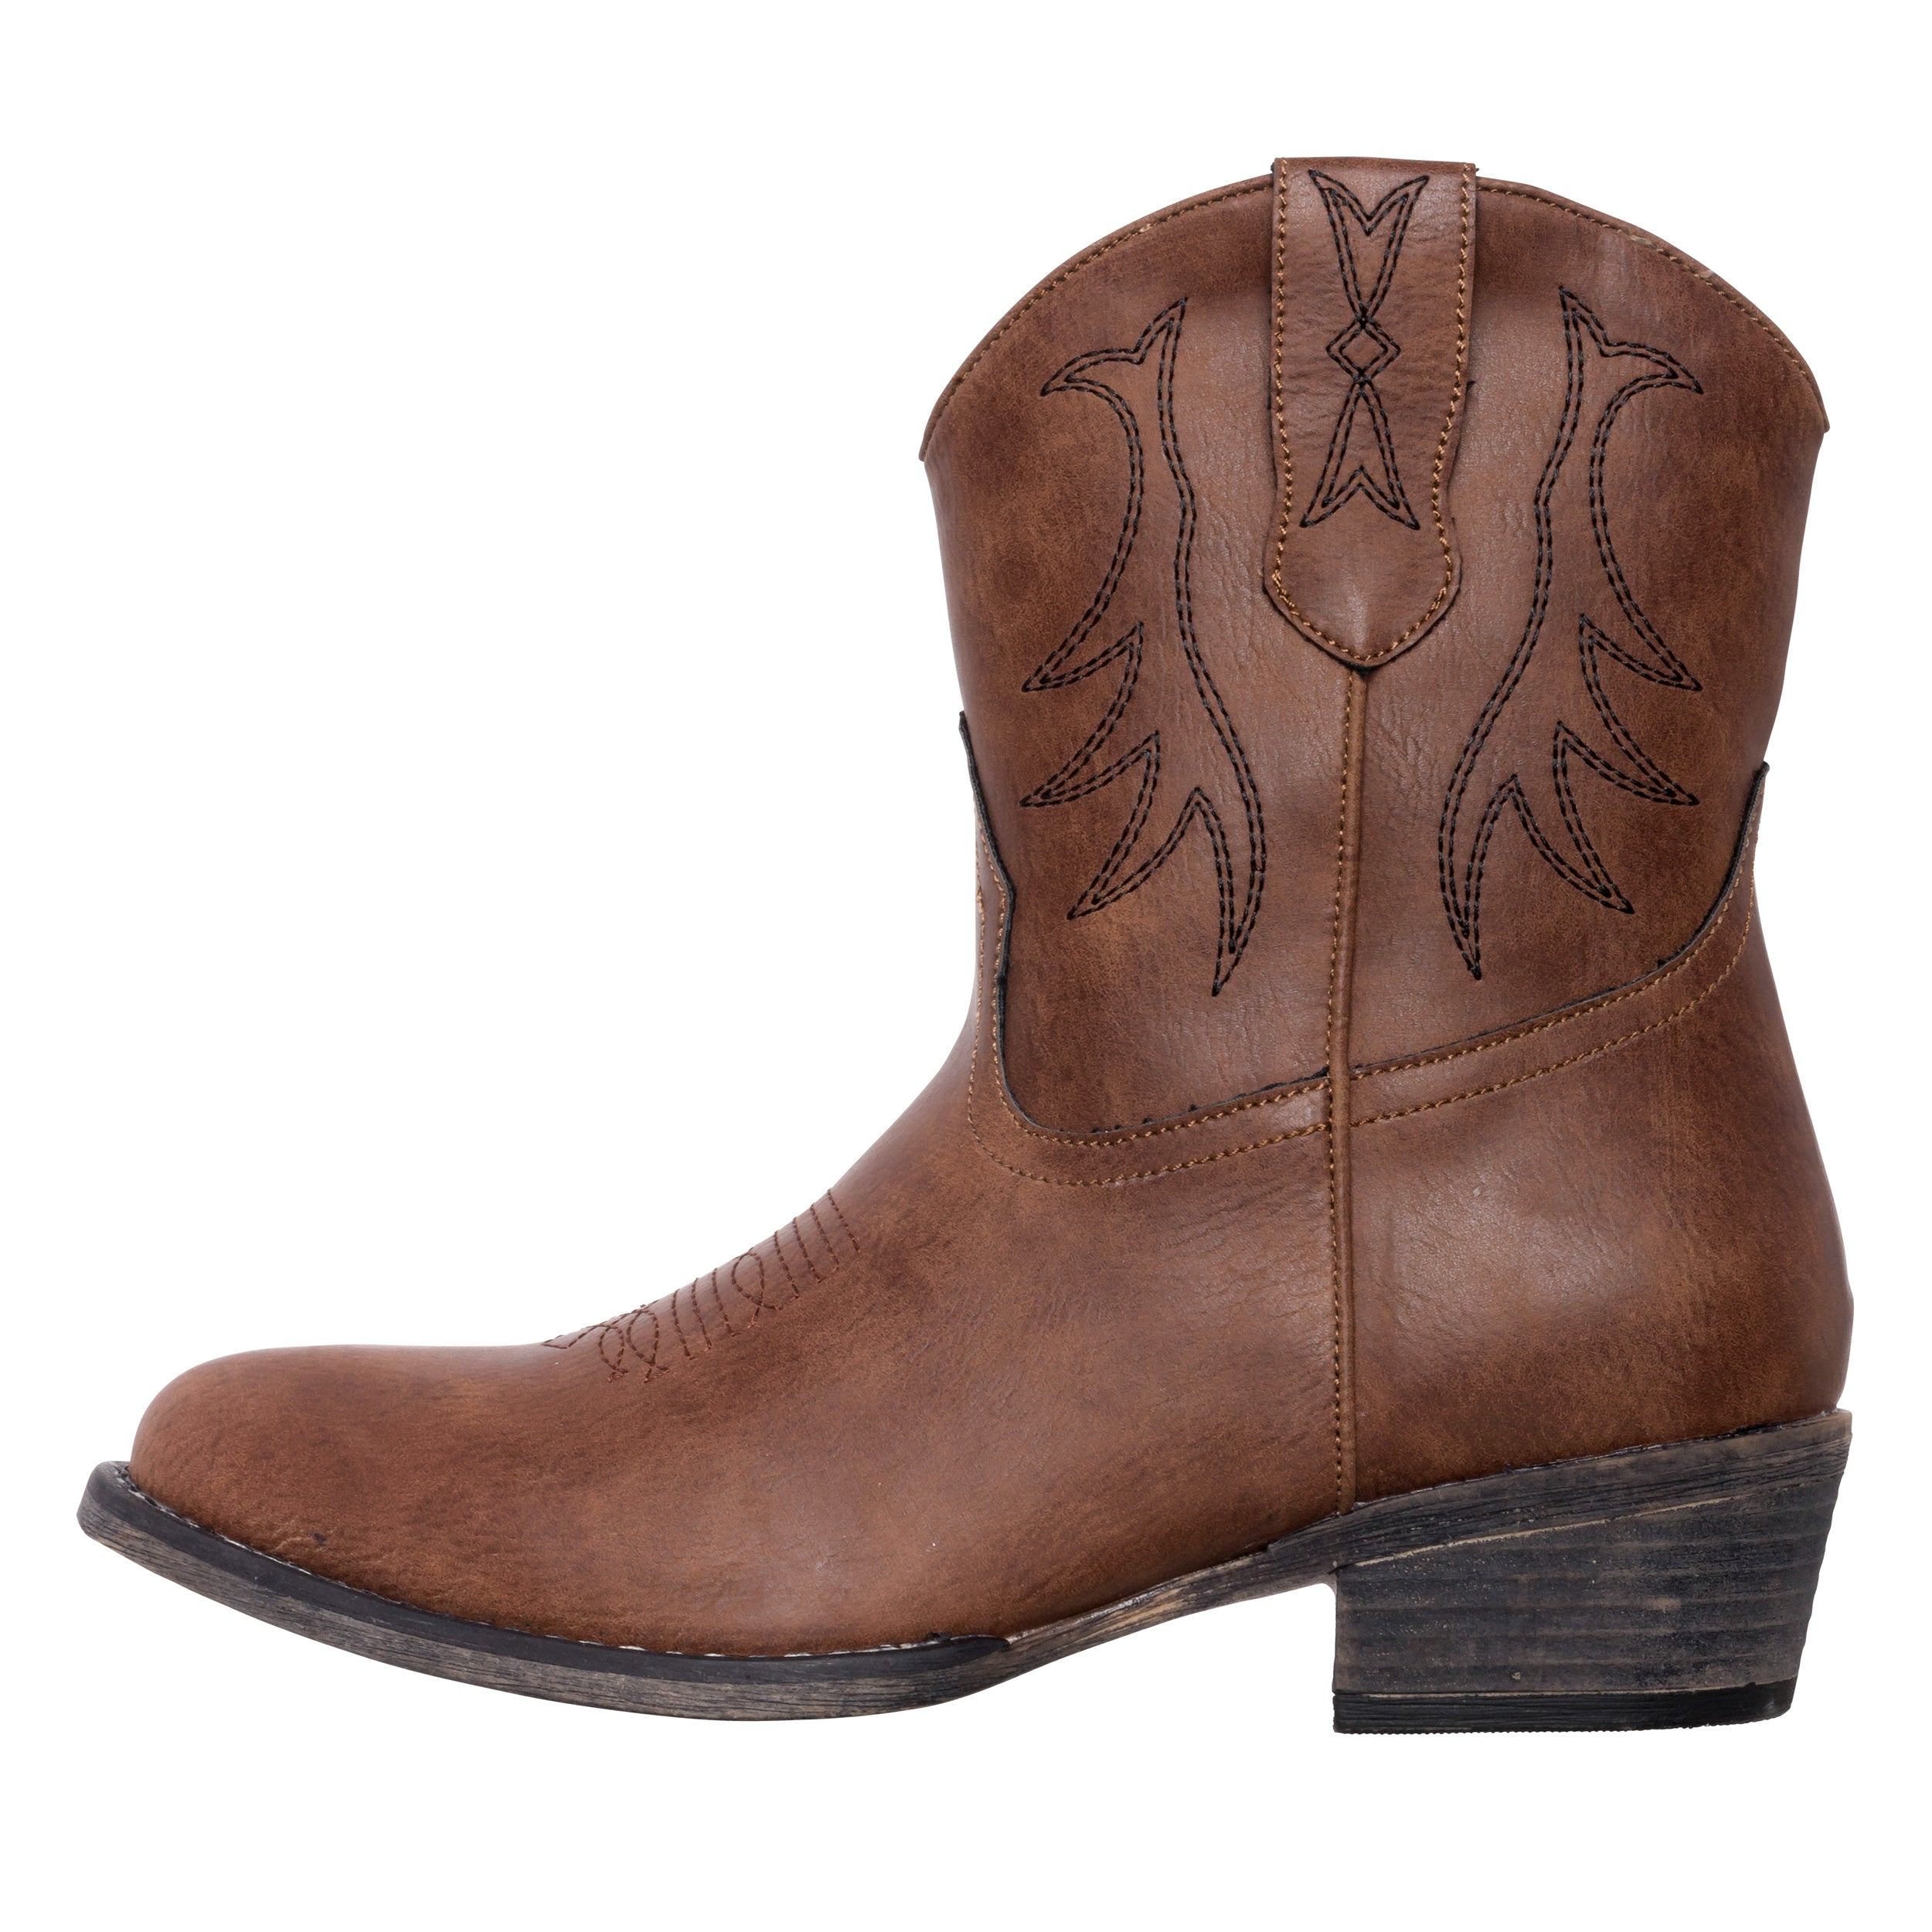 Womens Western Short Cowgirl Cowboy Boot Chestnut Brown Madison Round Toe by Silver Canyon